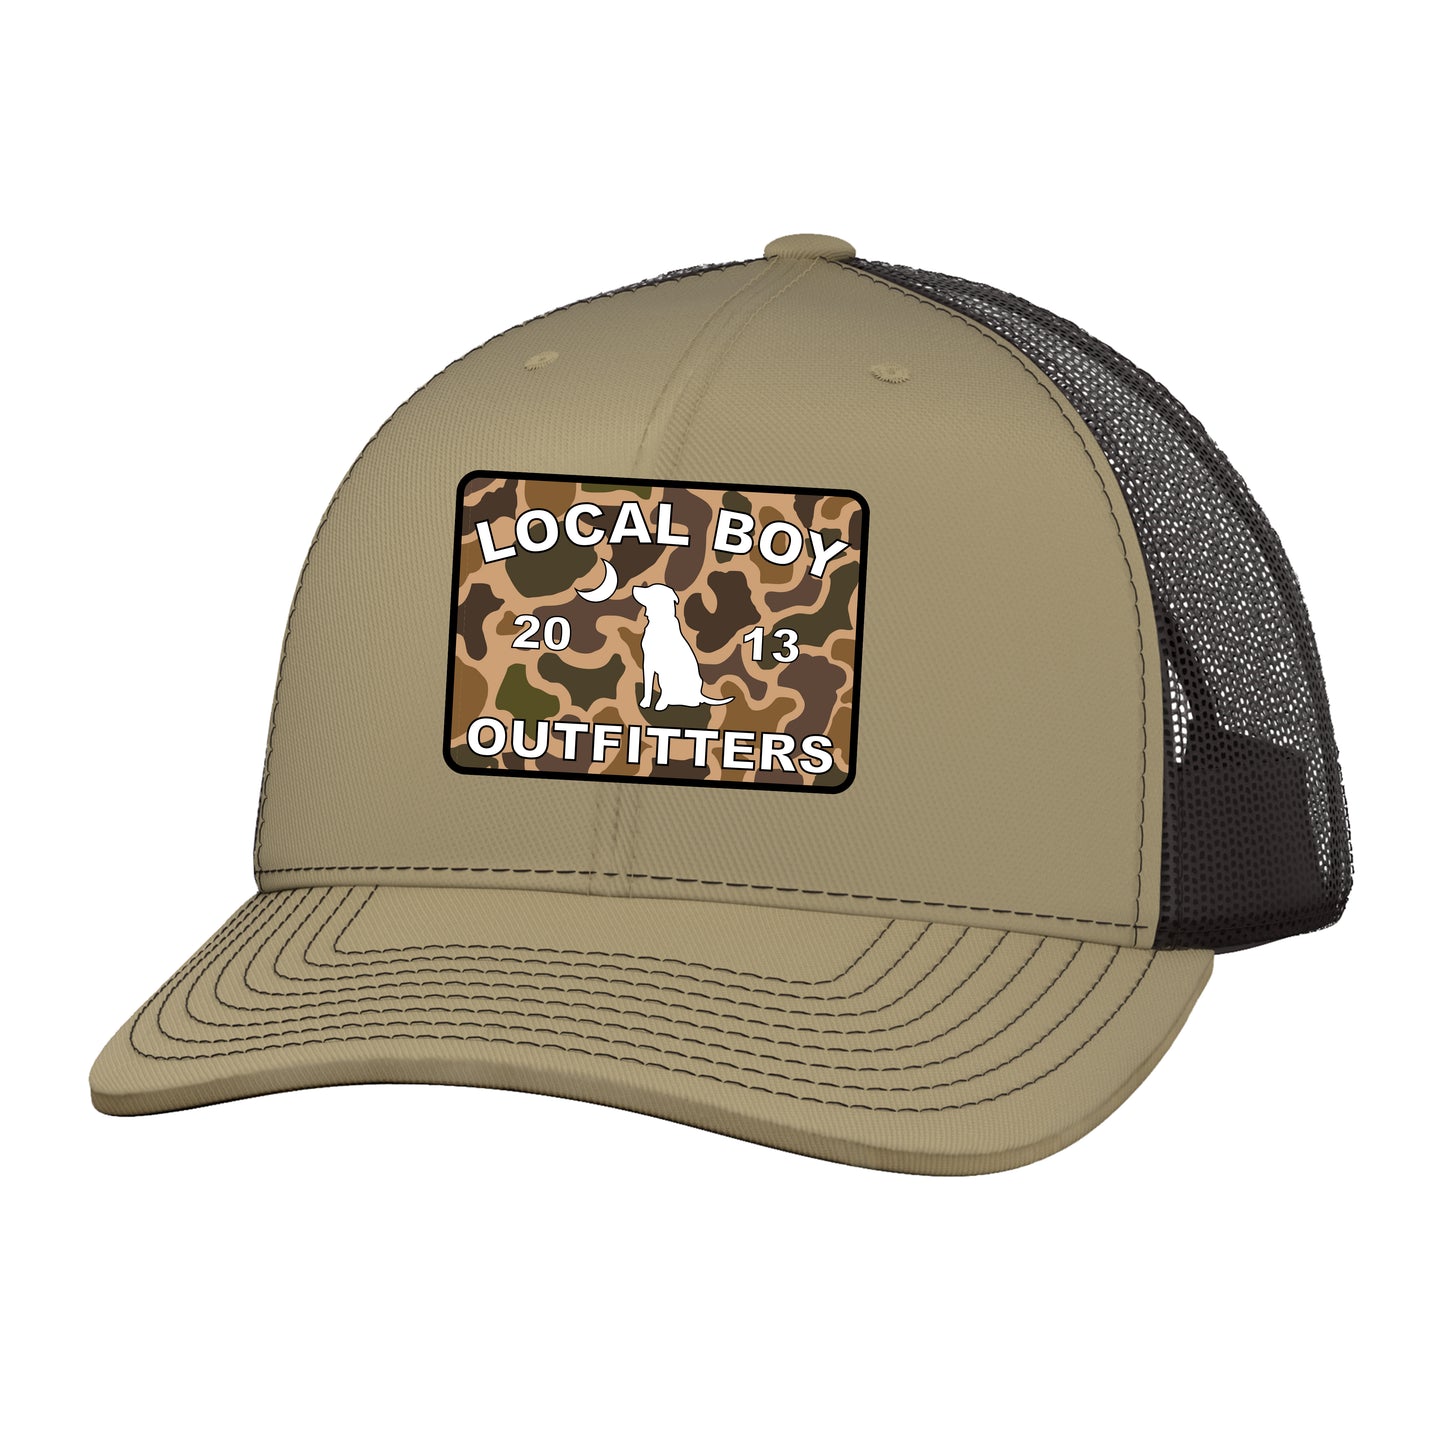 Old School Patch Hat